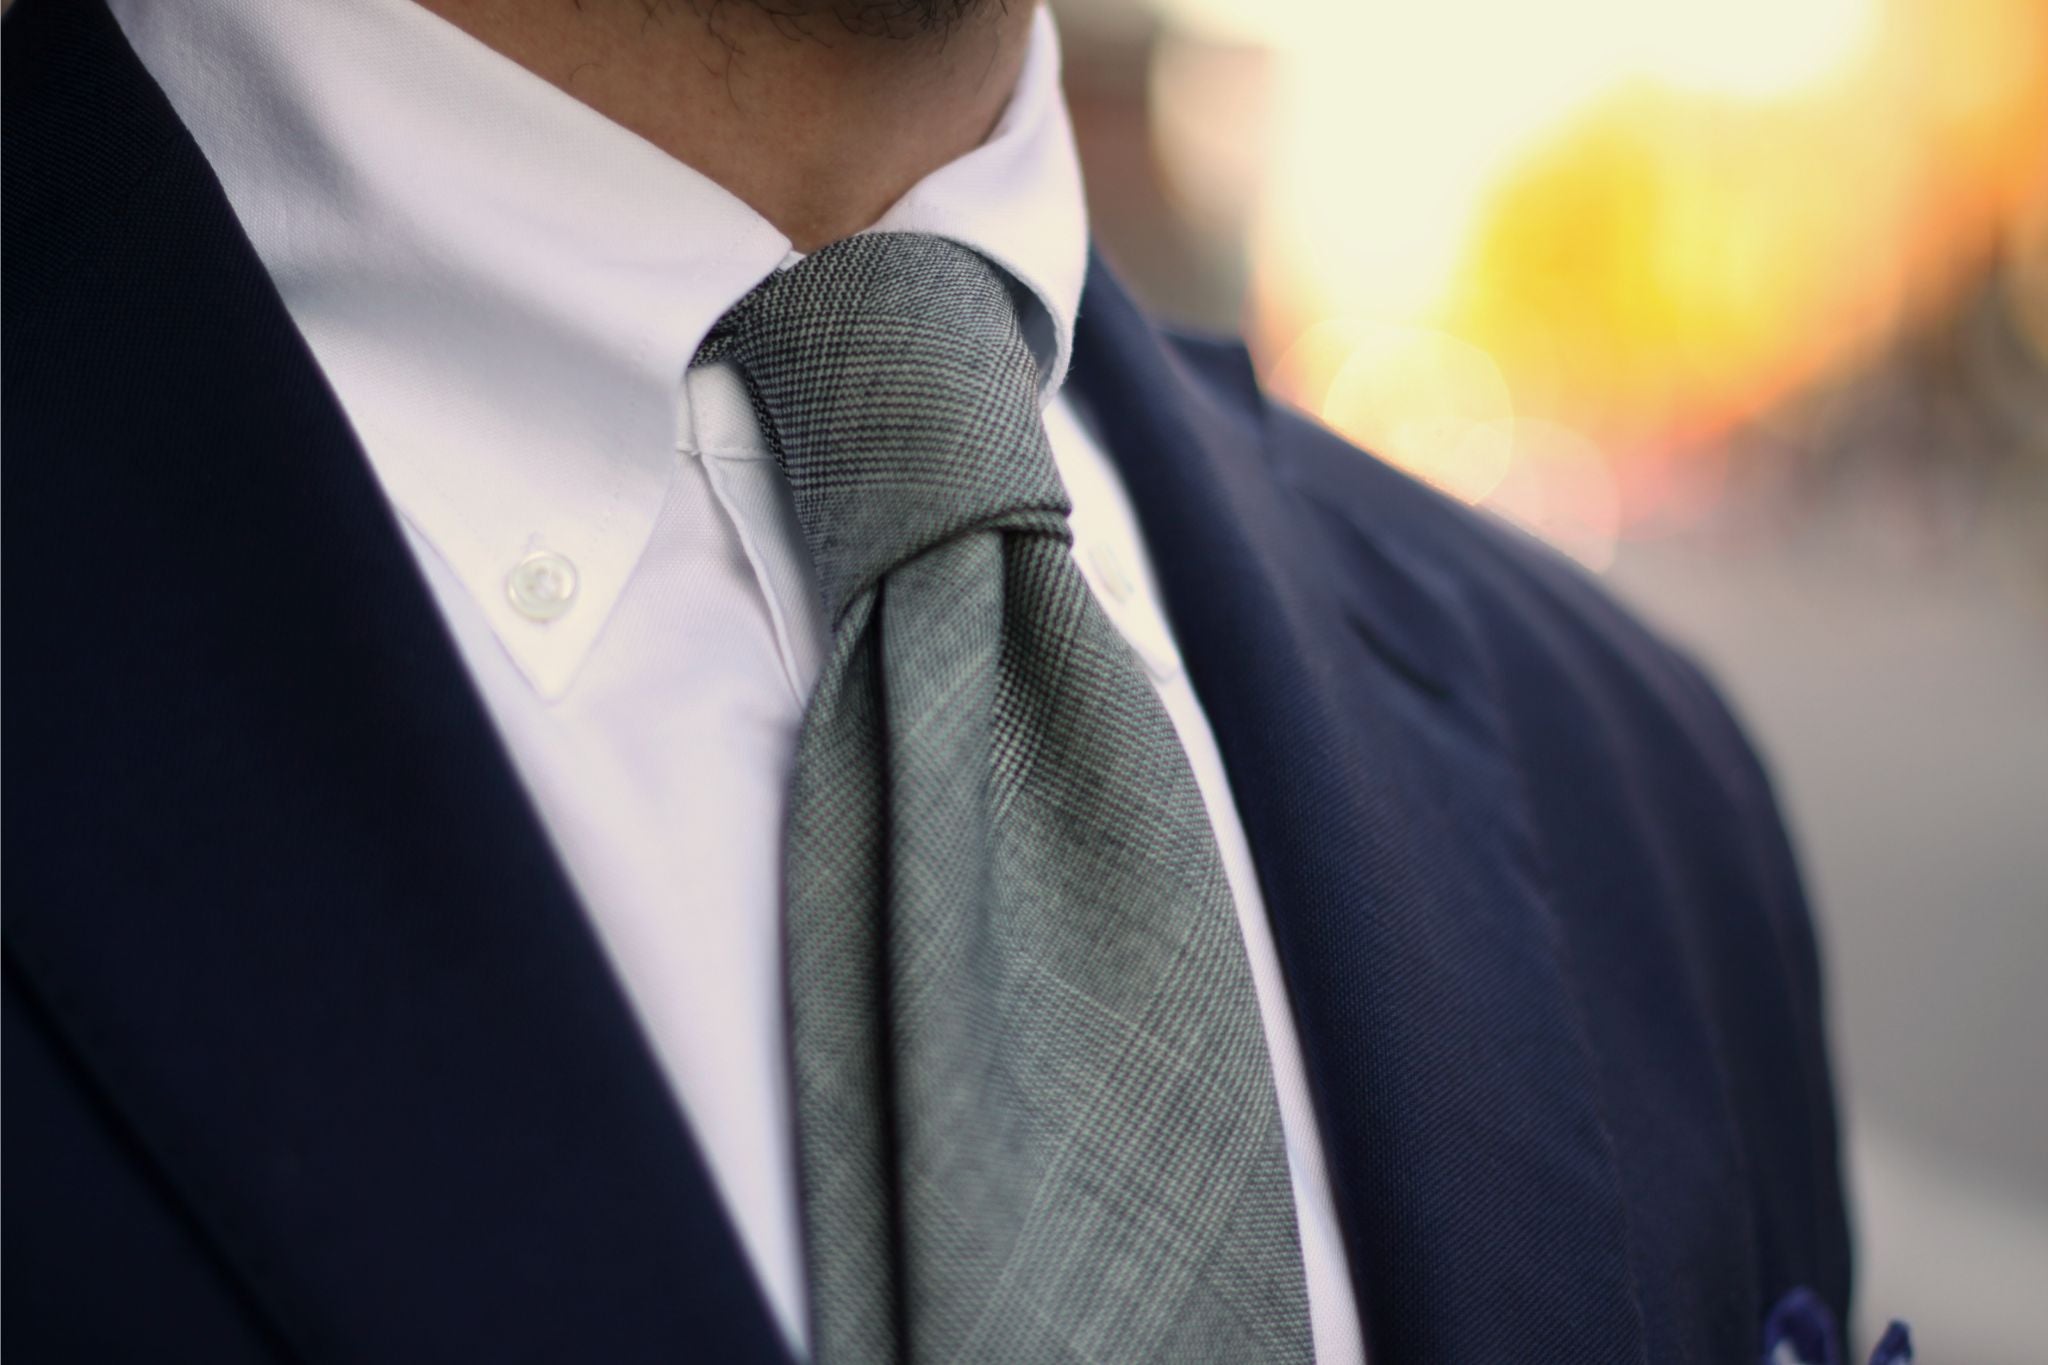 Dark blue suit for business casual - details of gray wool tie with white button down shirt